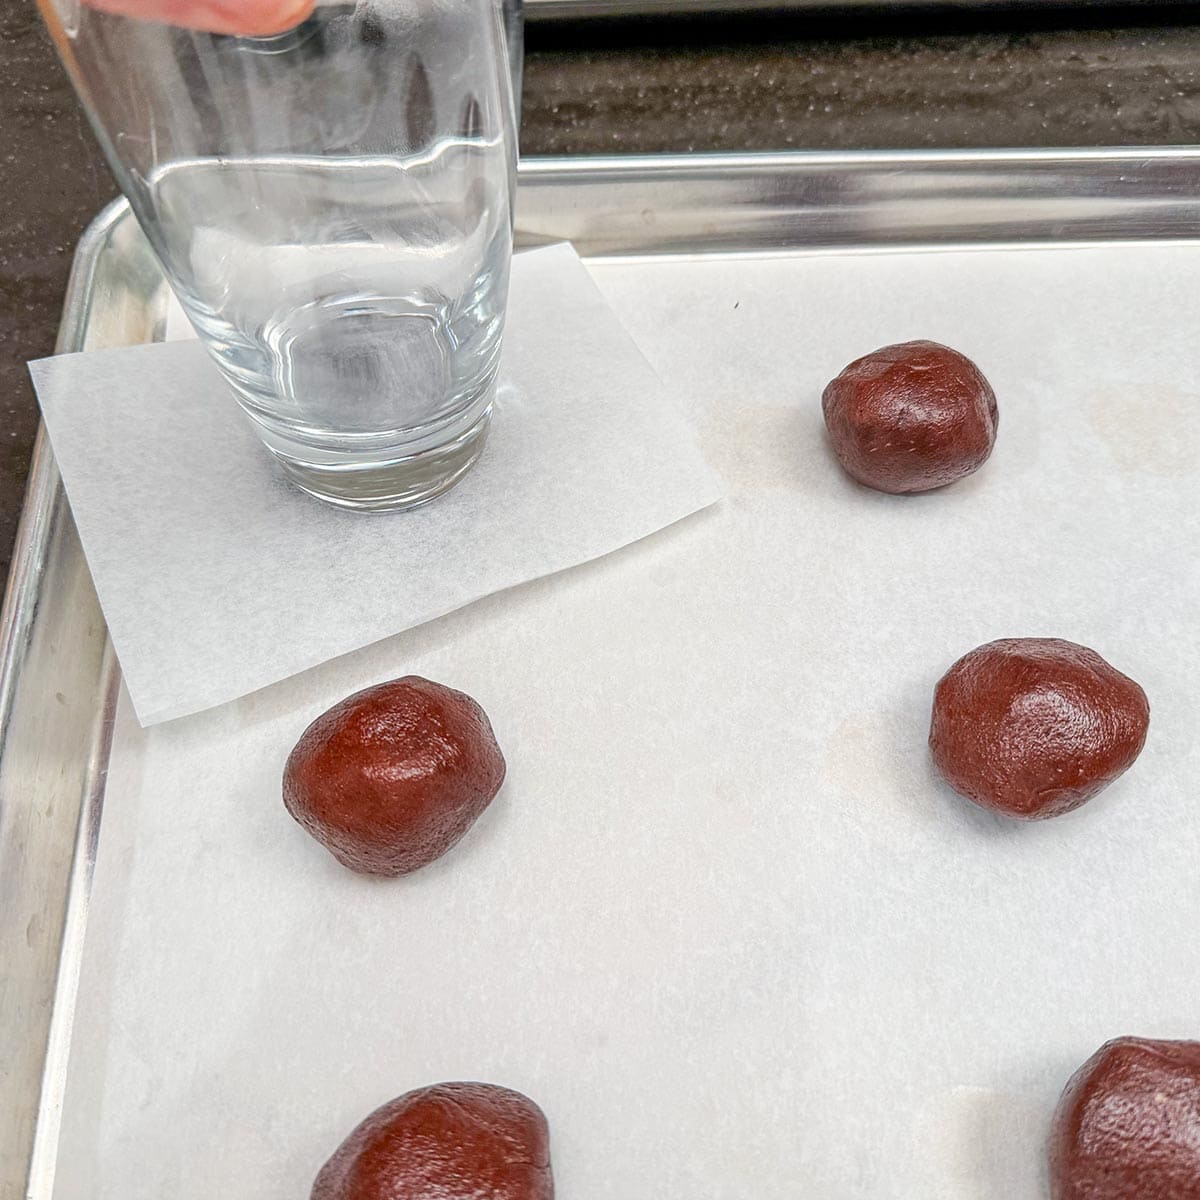 Using a square of parchment paper, place it on the round stuffed cookie, and using the bottom of a glass, press down slightly to flatten it.